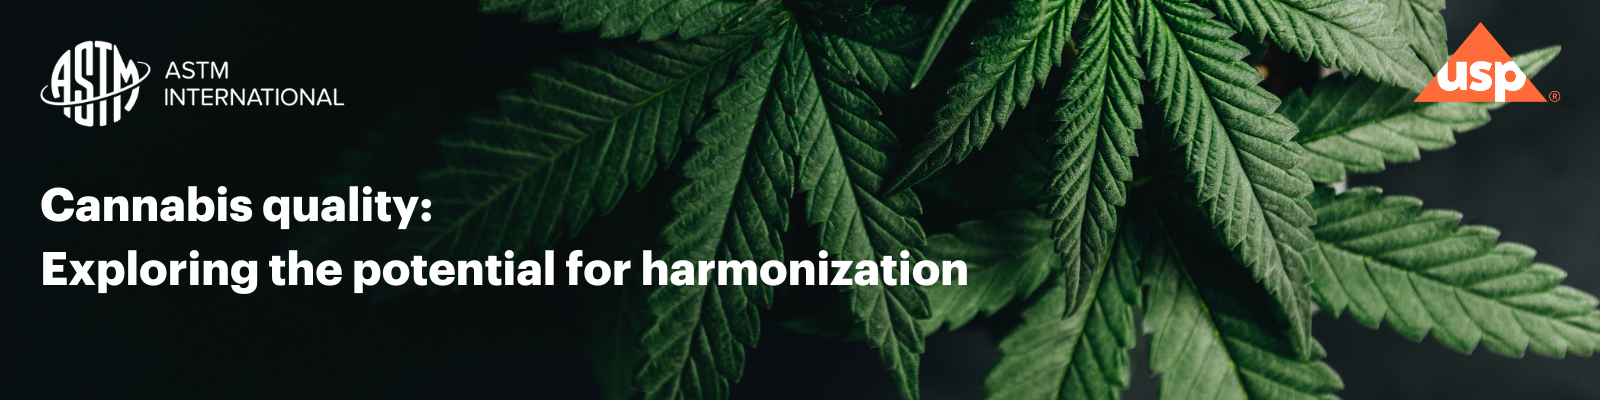 Cannabis quality: Exploring the potential for harmonization